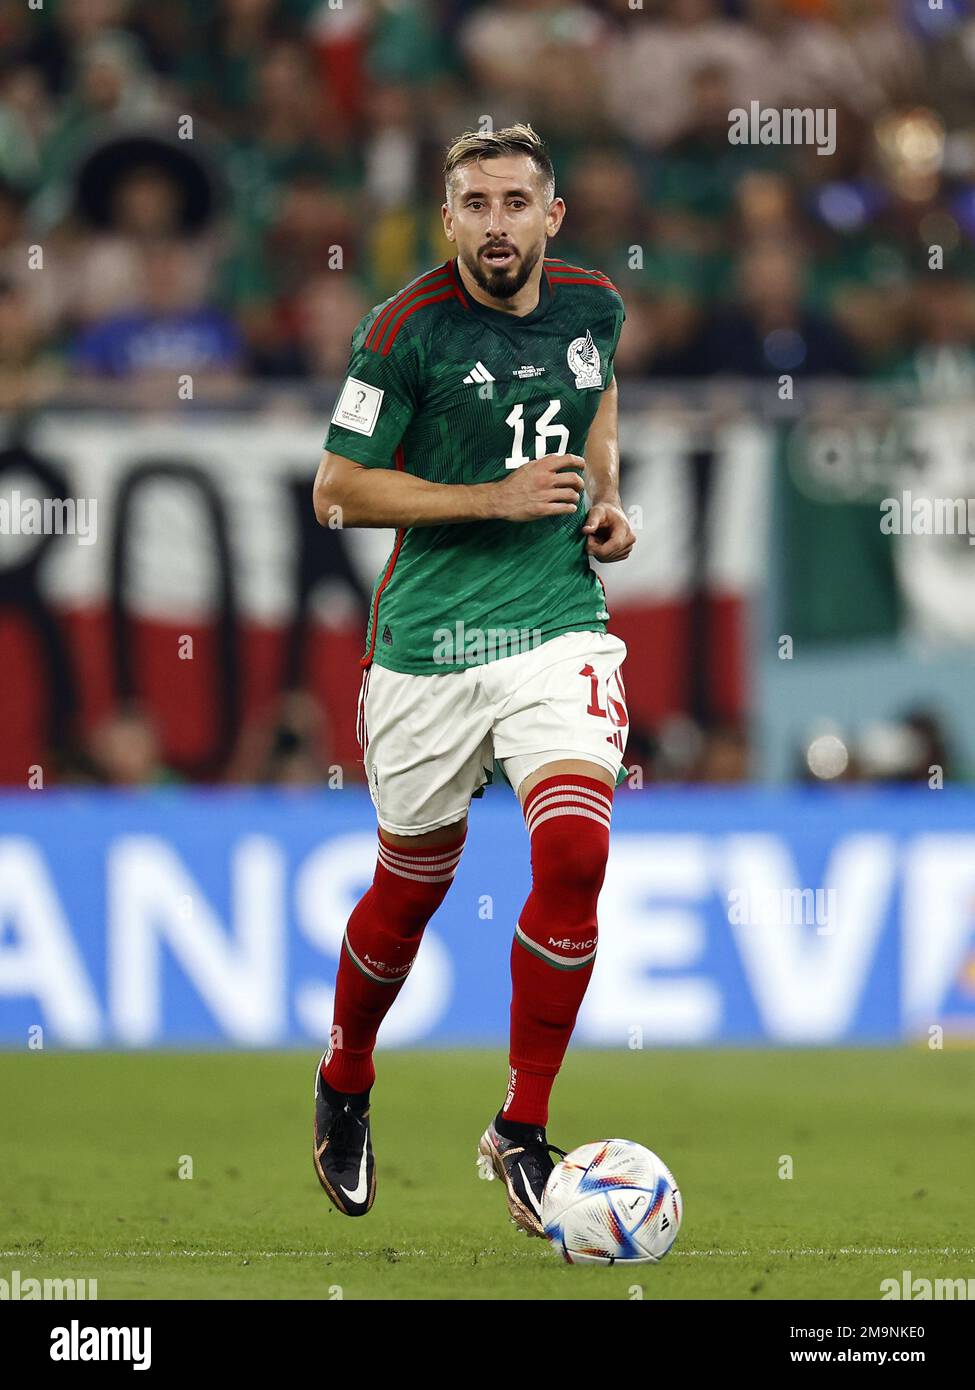 DOHA - Hector Herrera of Mexico during the FIFA World Cup Qatar 2022 group C match between Mexico and Poland at 974 Stadium on November 22, 2022 in Doha, Qatar. AP | Dutch Height | MAURICE OF STONE Stock Photo